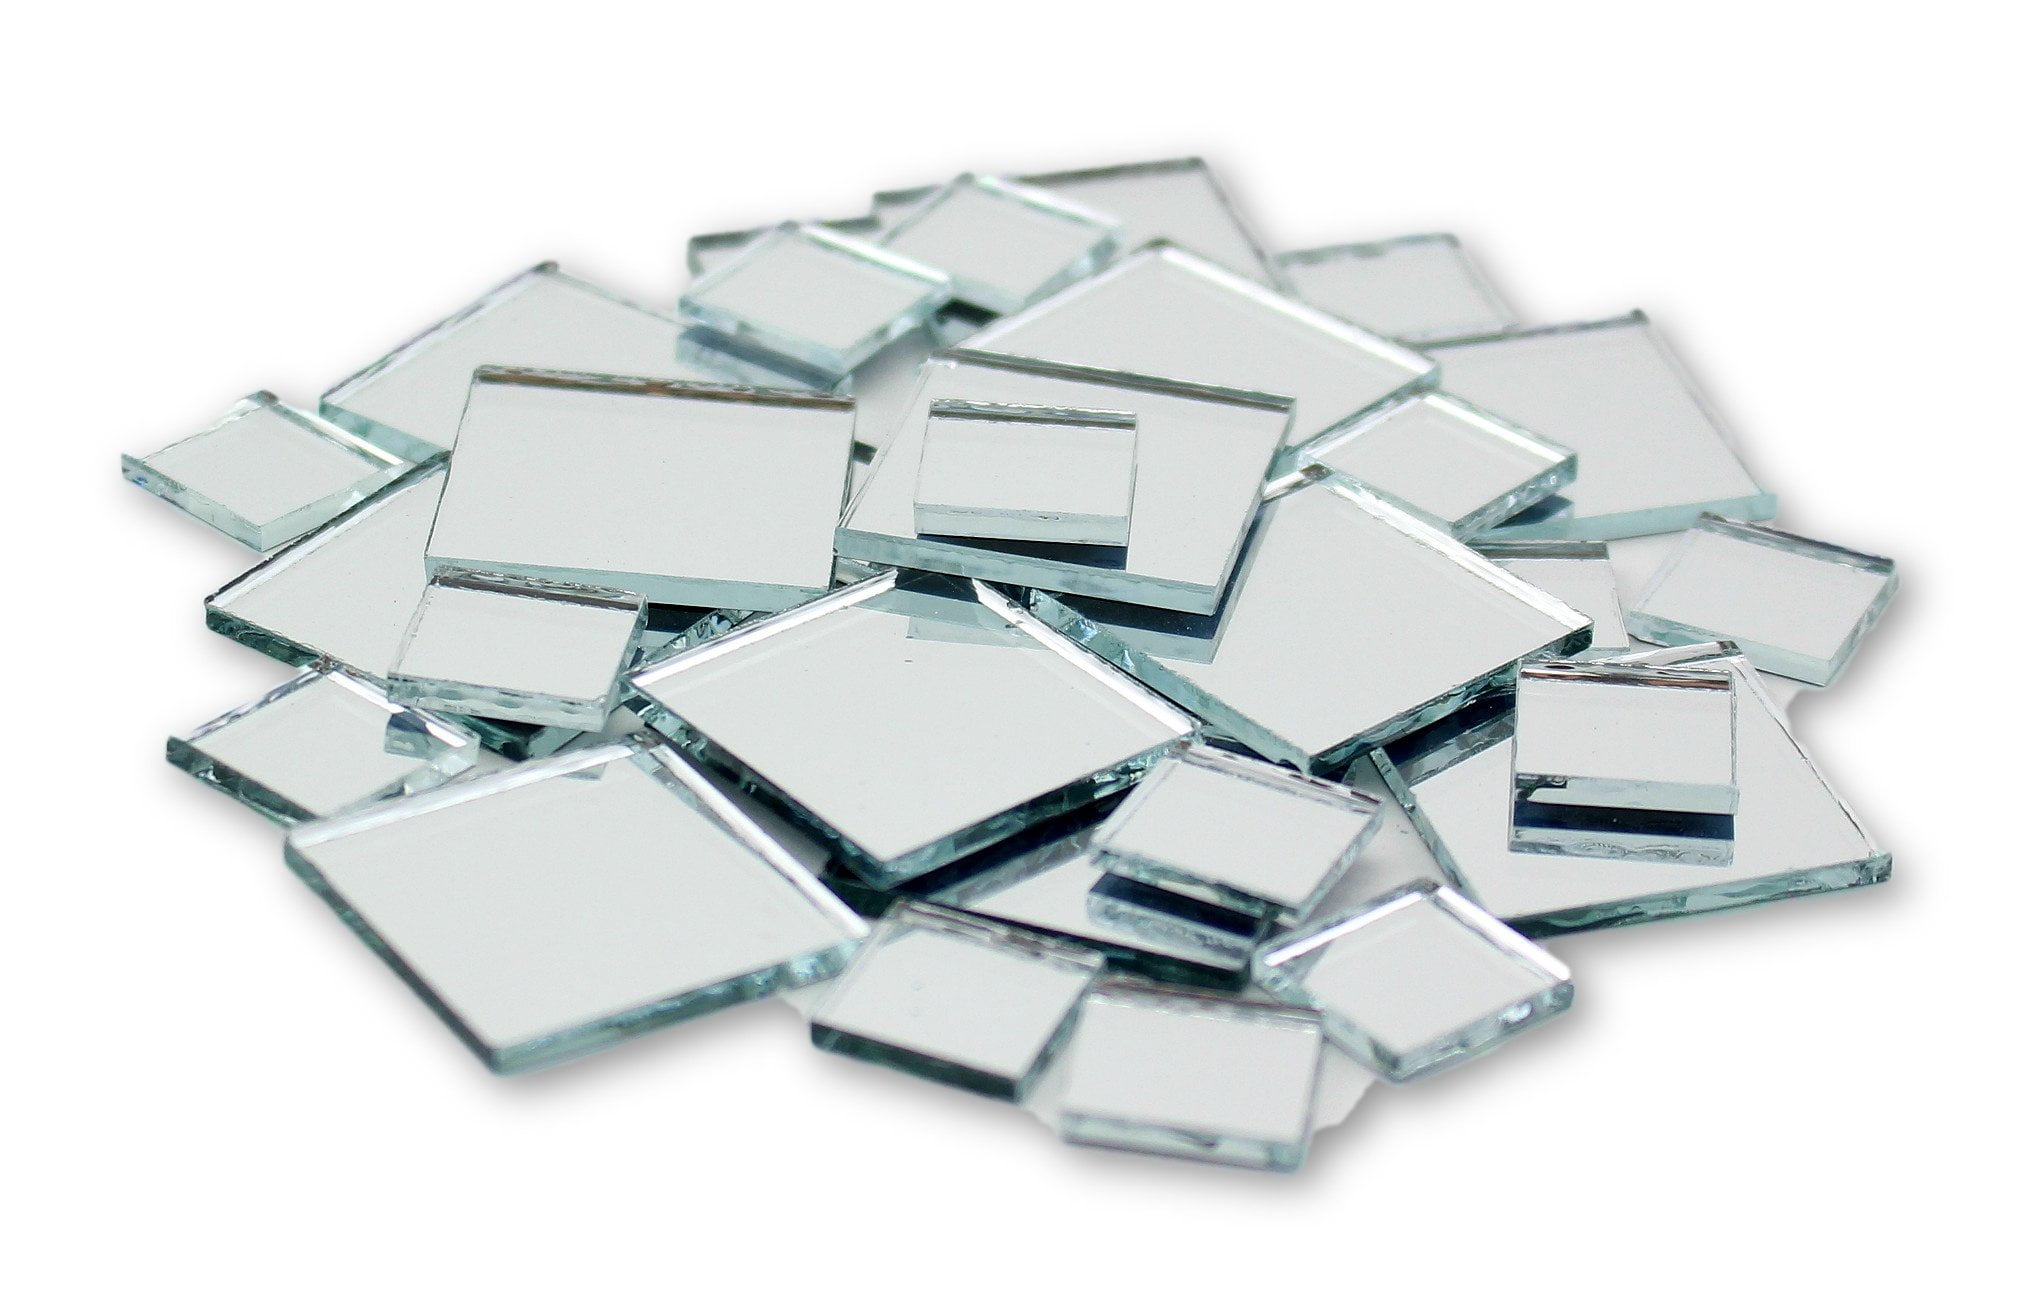 50 Pieces 2 Inch Mini Size Square Mirror Adhesive Small Square Mirror Craft Mirror Tiles for Crafts and DIY Projects Supplies Home Decoration 